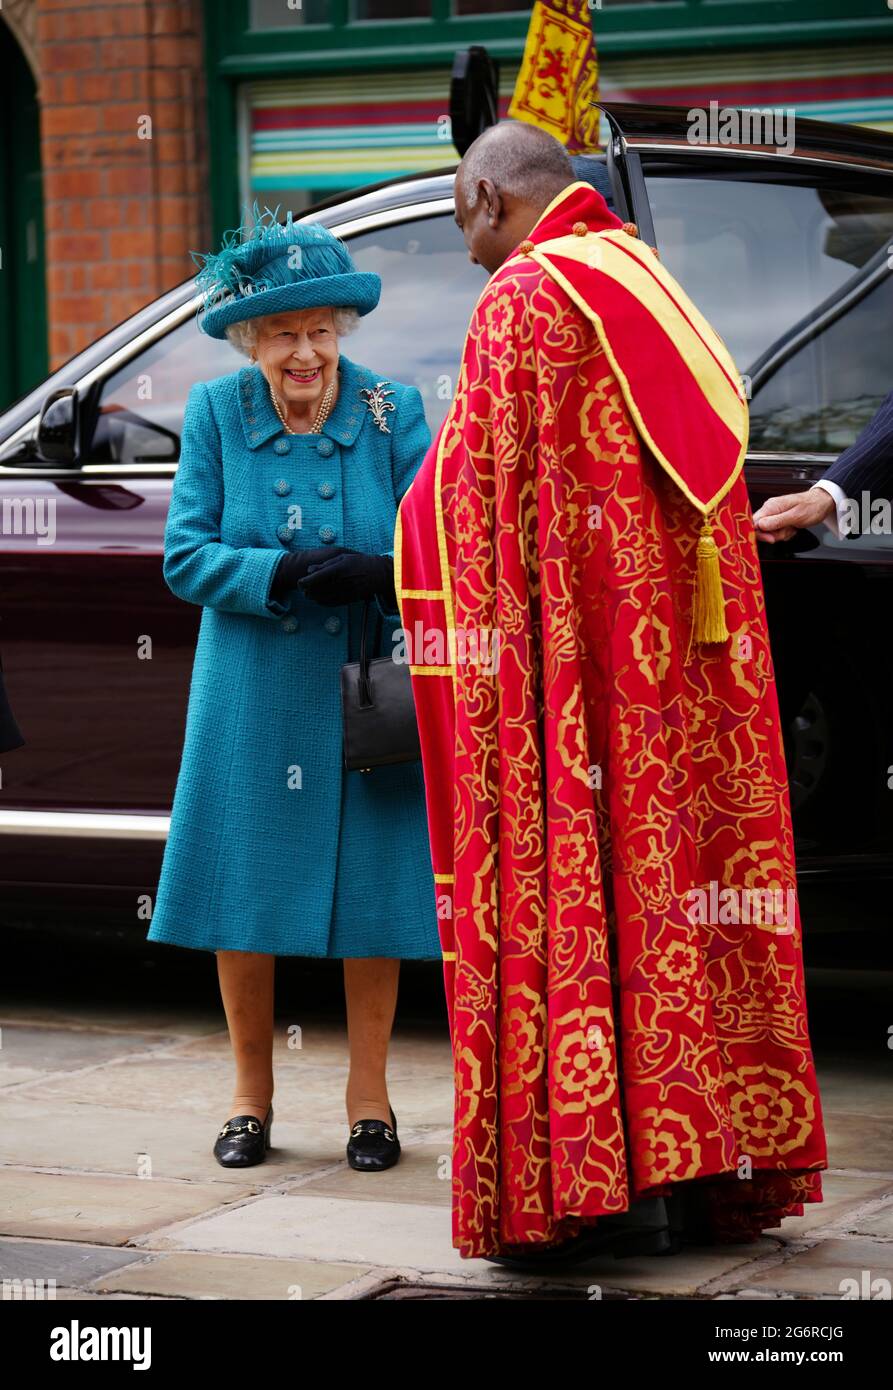 Britain's Queen Elizabeth meets Dean of Manchester, Rogers Govender, as she visits Manchester Cathedral, in Manchester, Britain, July 8, 2021. Christopher Furlong/Pool via REUTERS Stock Photo